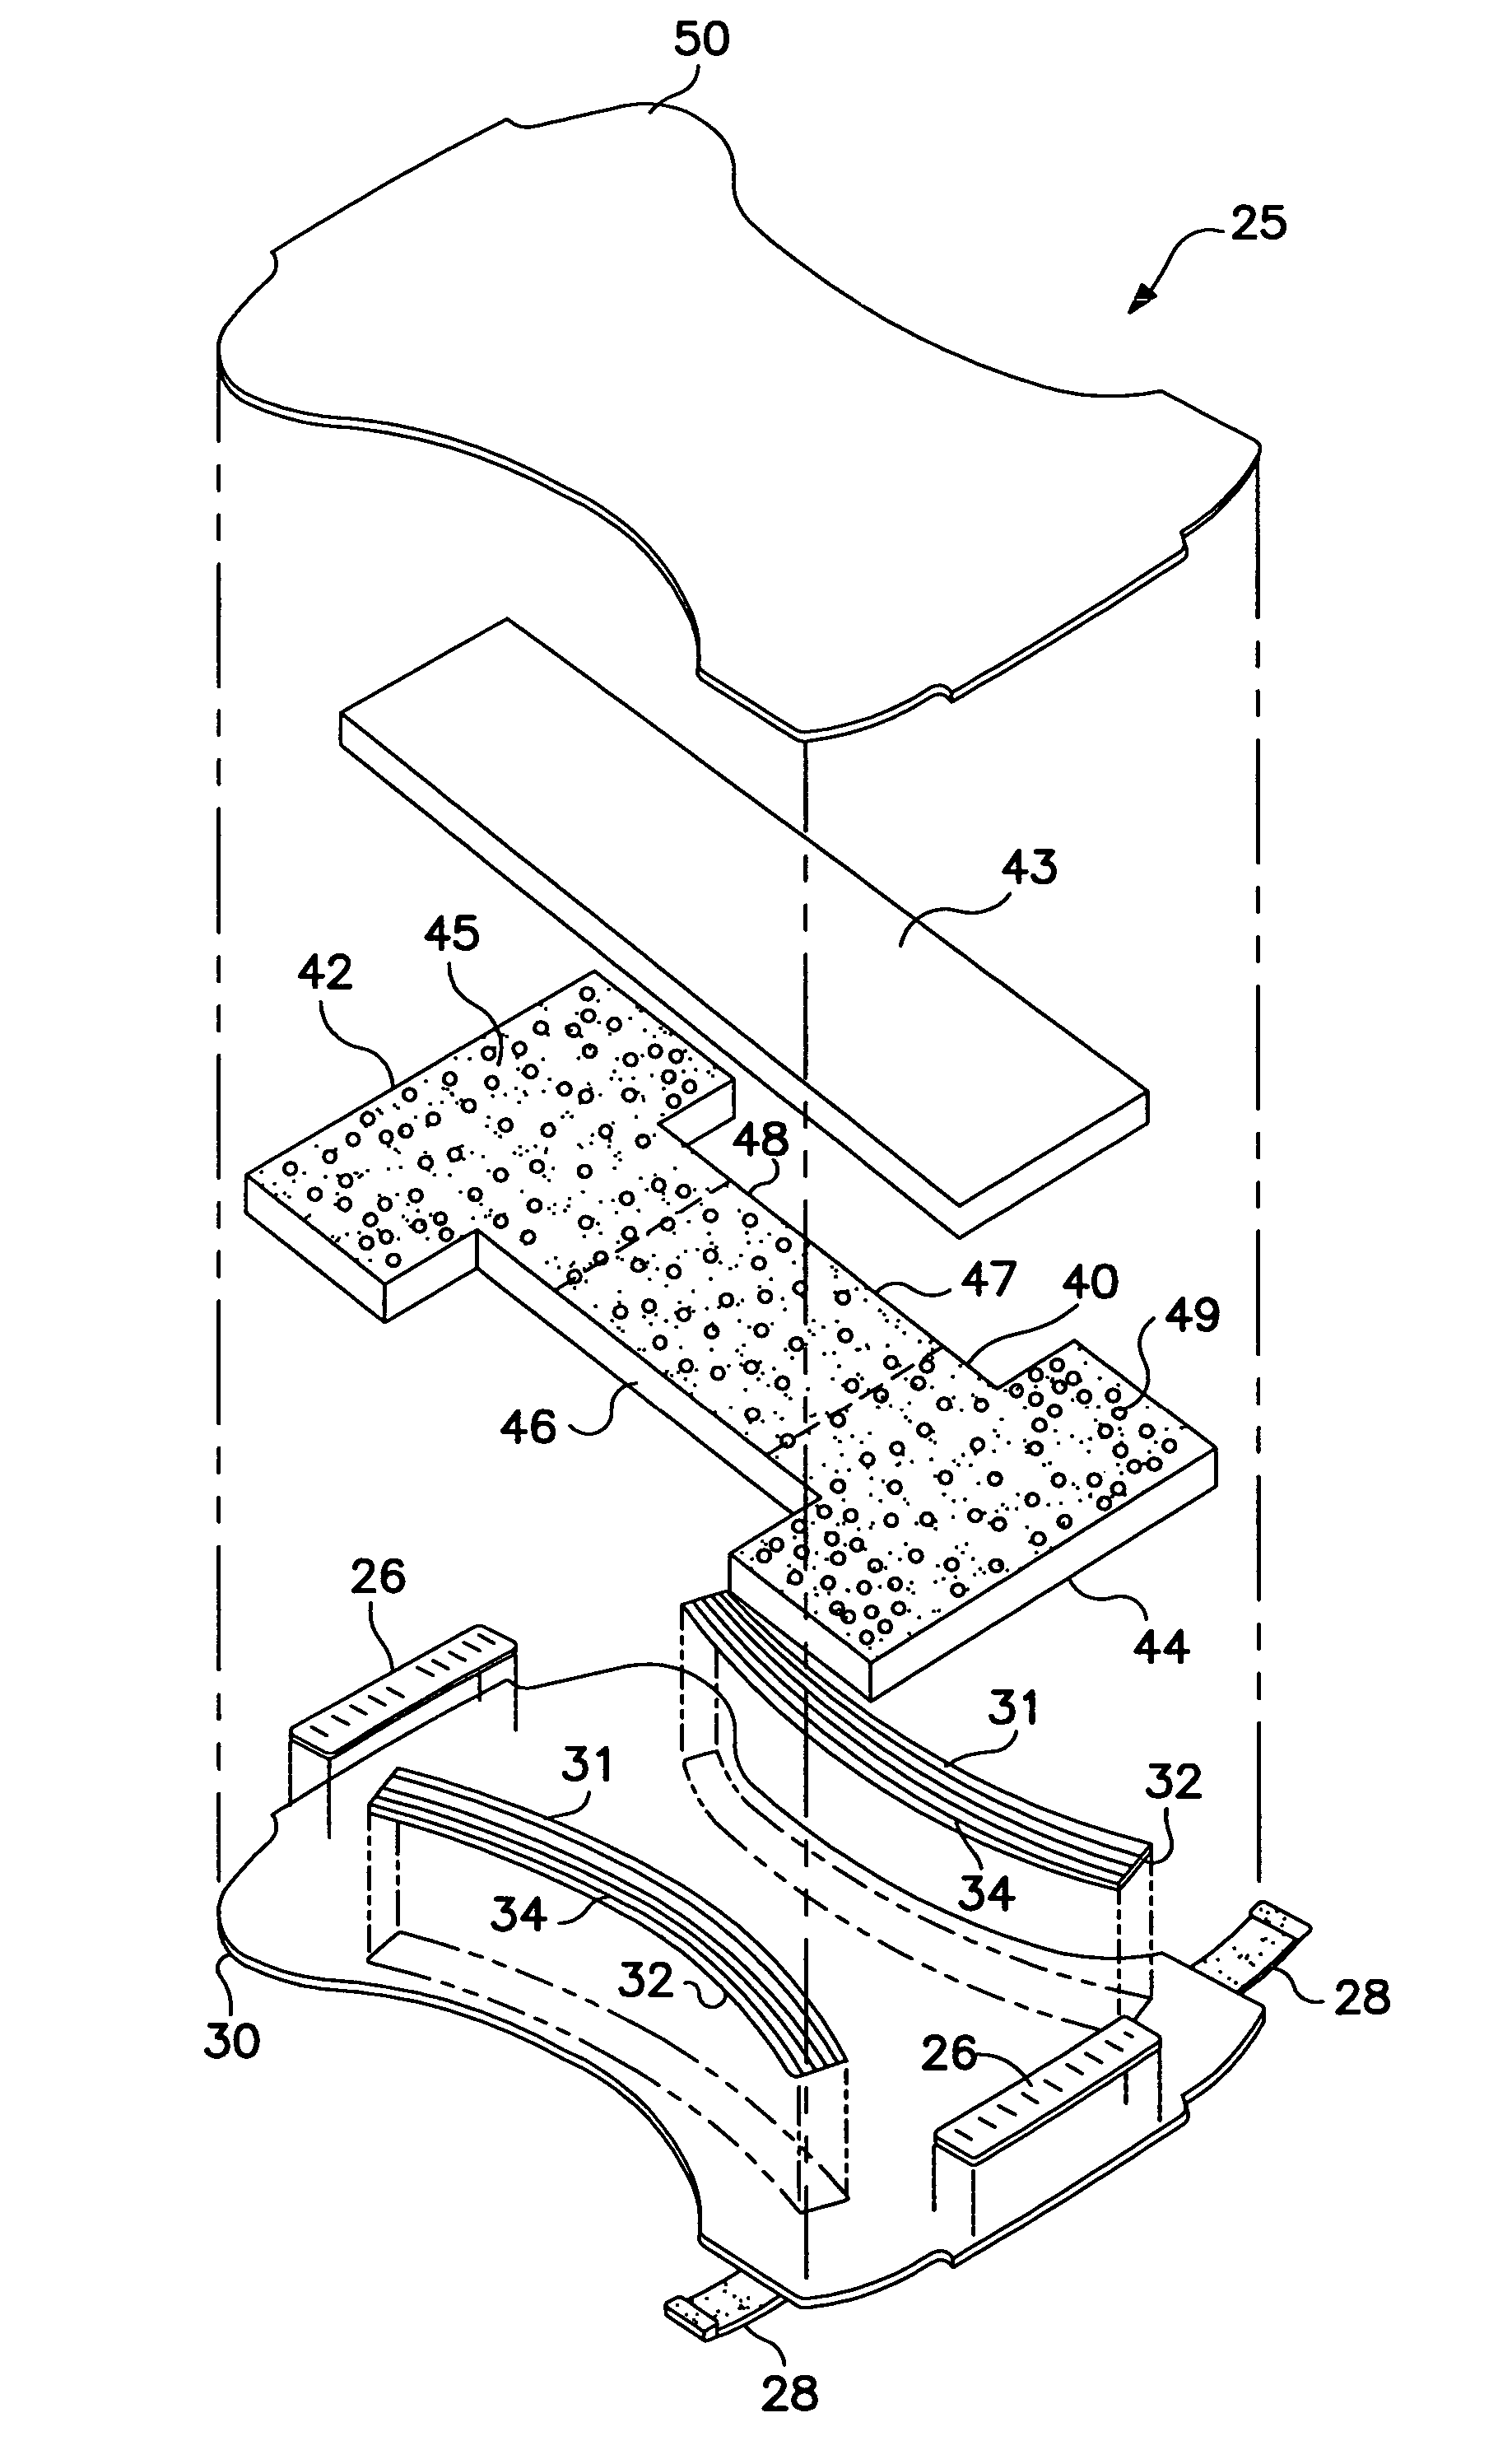 Absorbent article having shaped absorbent core formed on a substrate